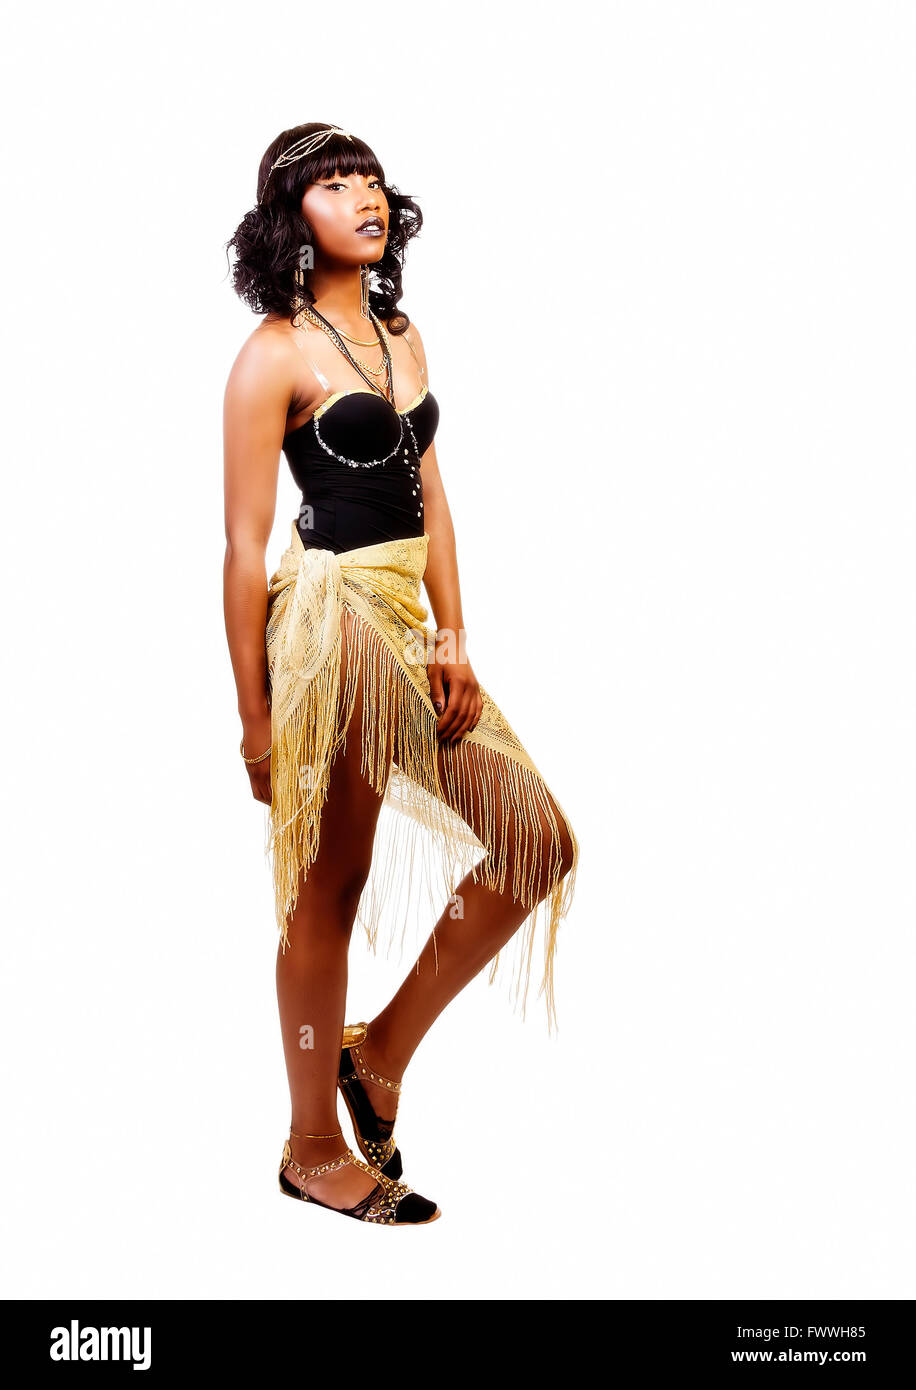 Skinny Attractive Black Woman Standing Leotards And Golden Wrap Stock Photo